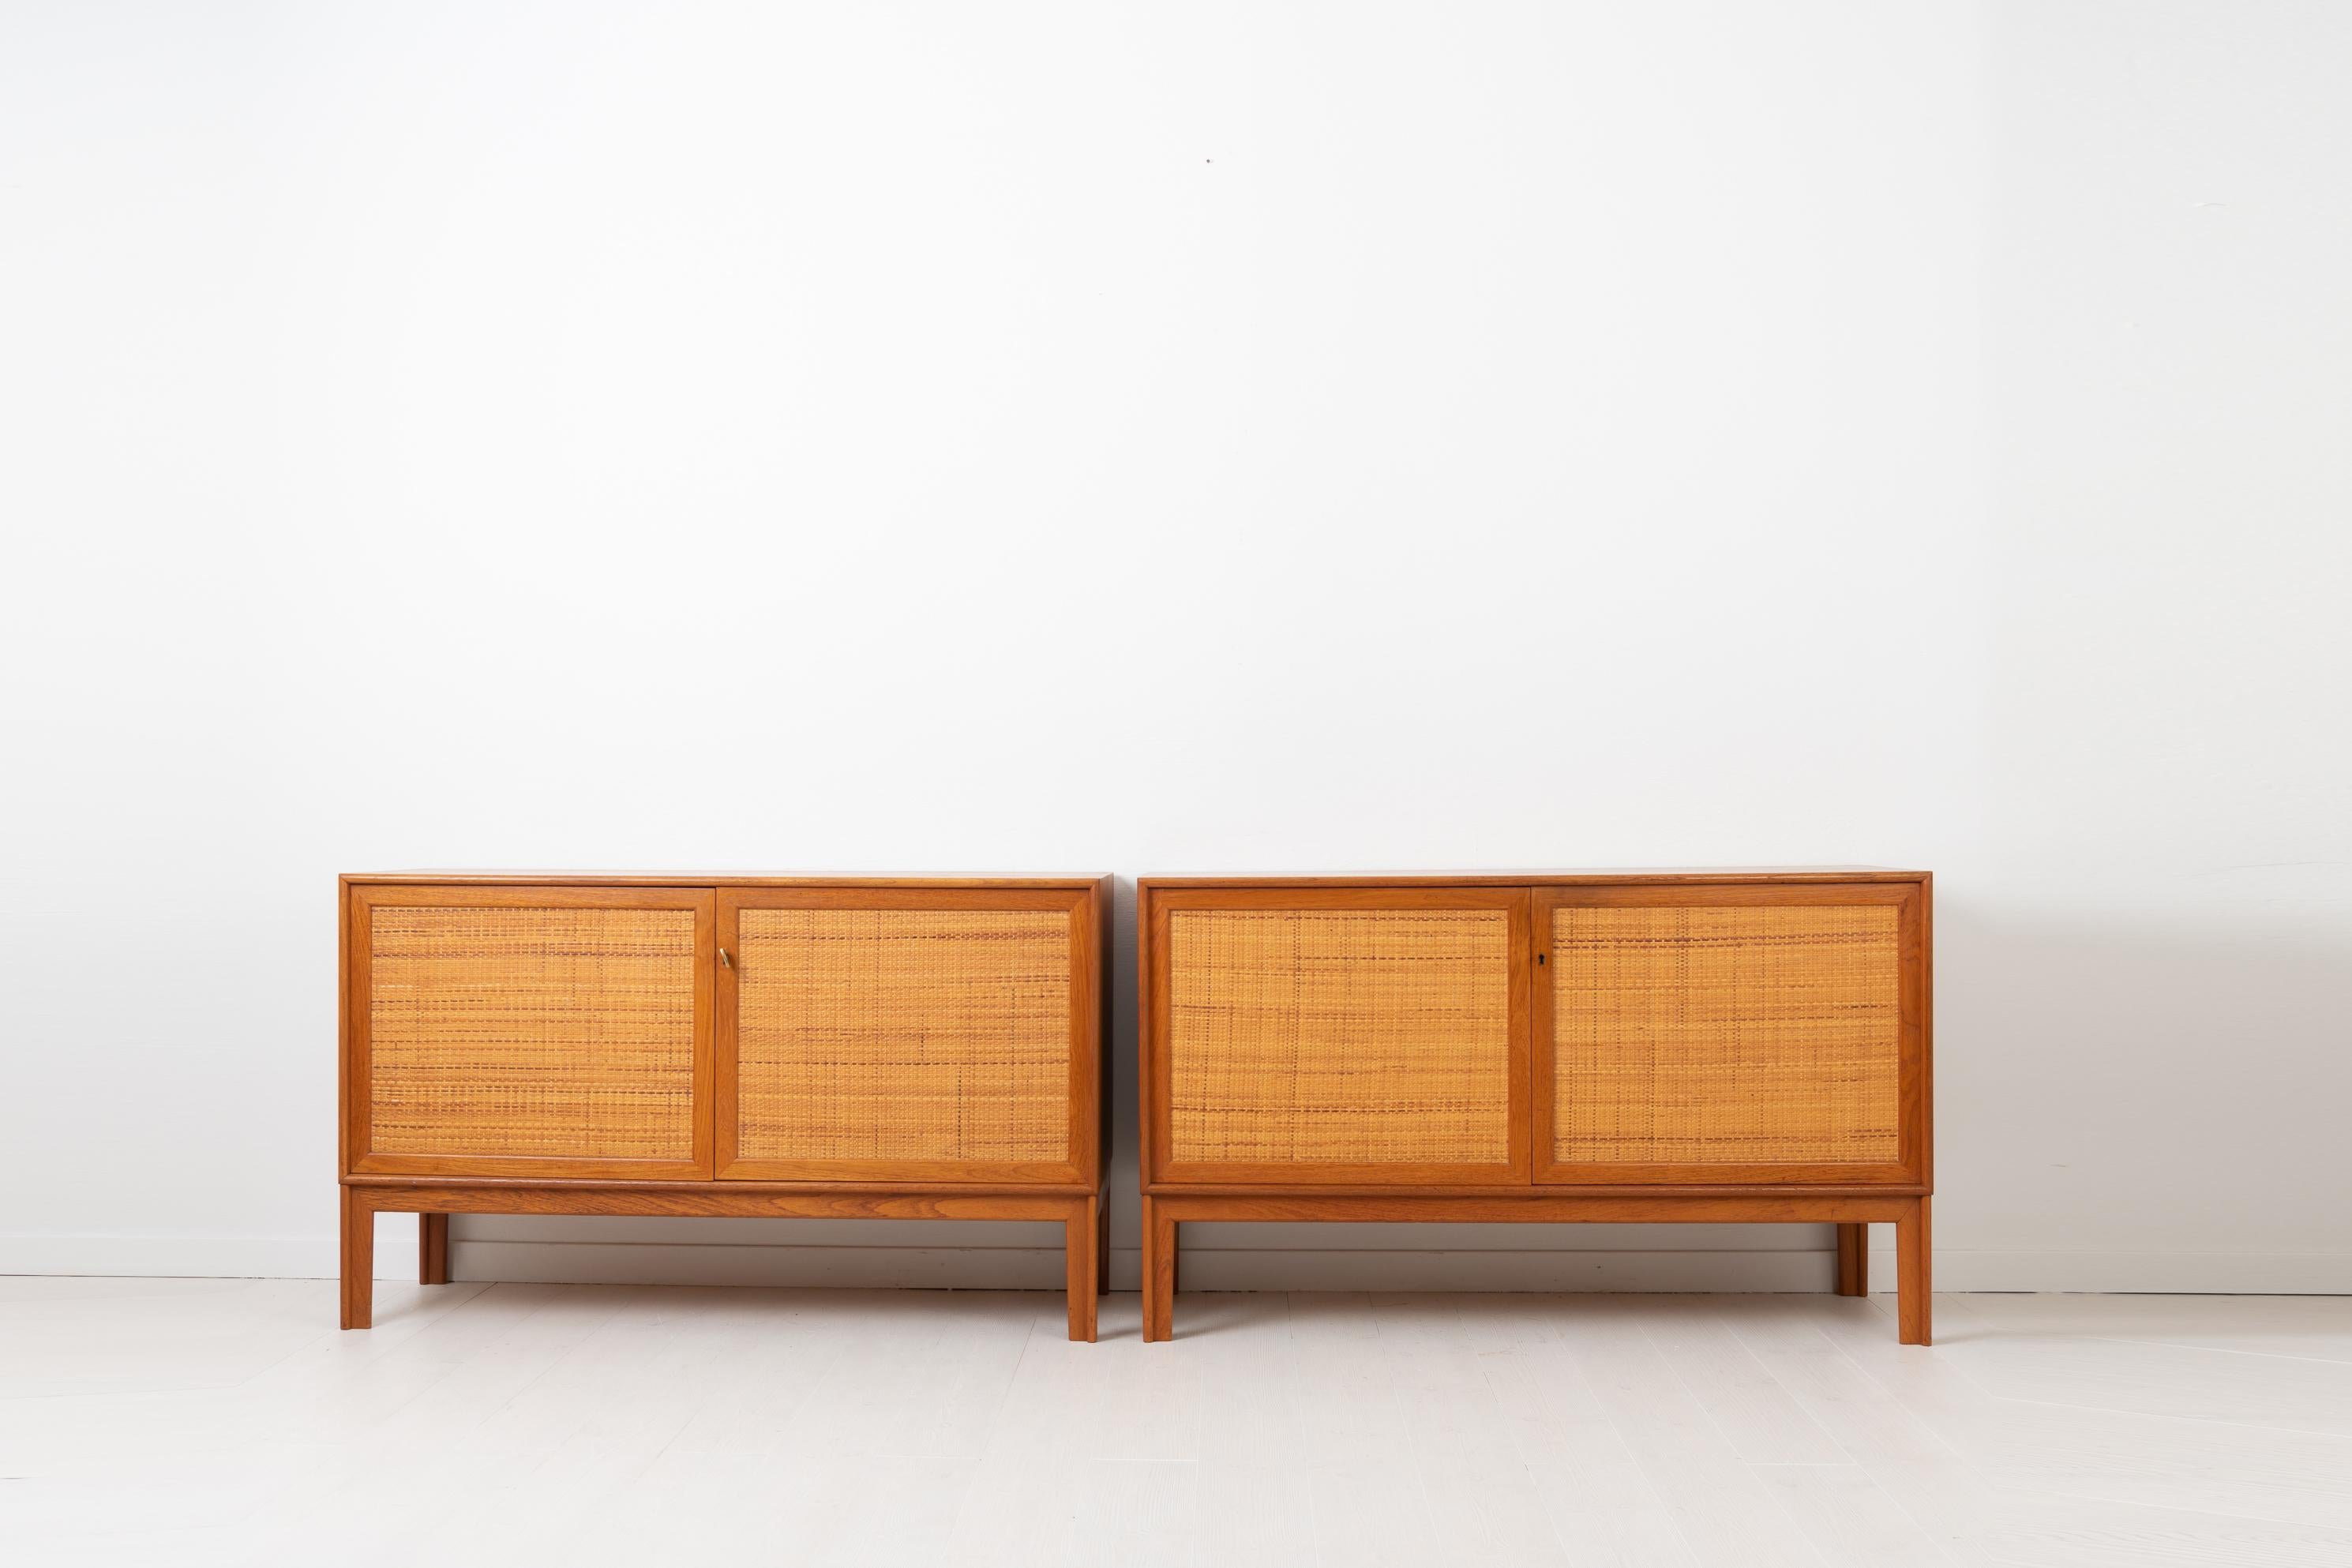 Teak sideboards by Alf Svensson for Bjästa Snickerifabrik in Sweden. This pair of sideboards are from the mid-20th century and a prime example of the Scandinavian Modern style. Doors dressed in rattan. Designed and manufactured during 1960s, both